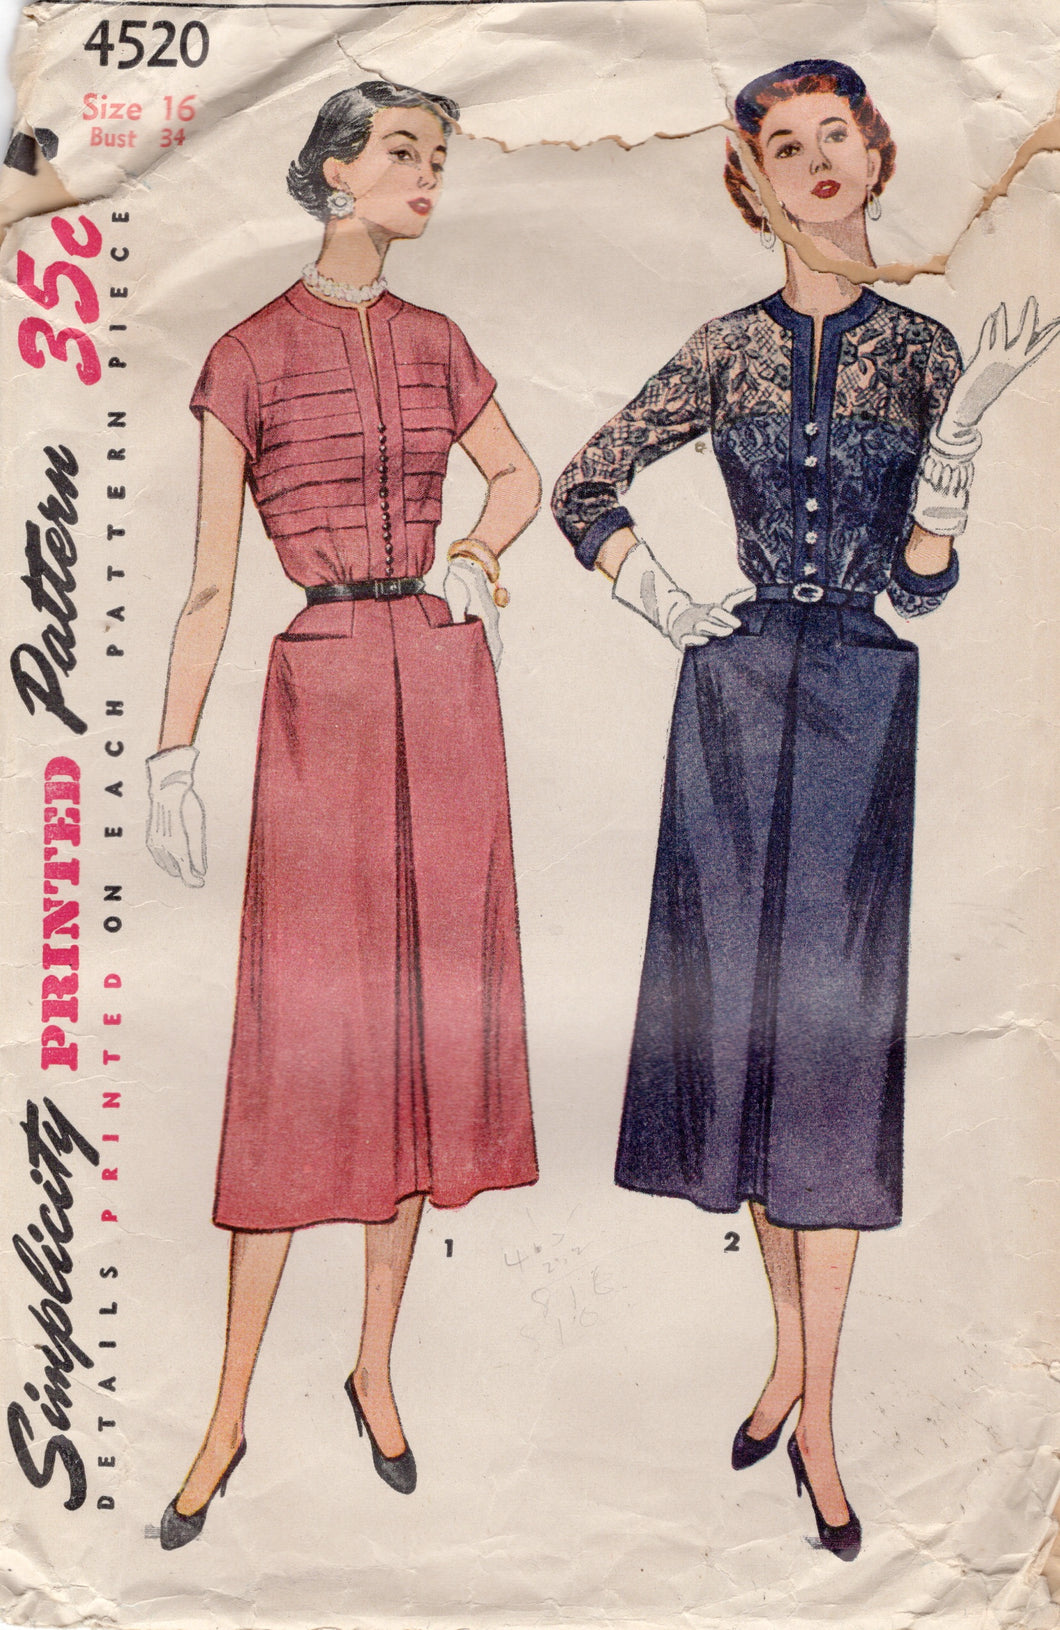 1950's Simplicity One Piece Dress with pockets and Two sleeve lengths - Bust 34